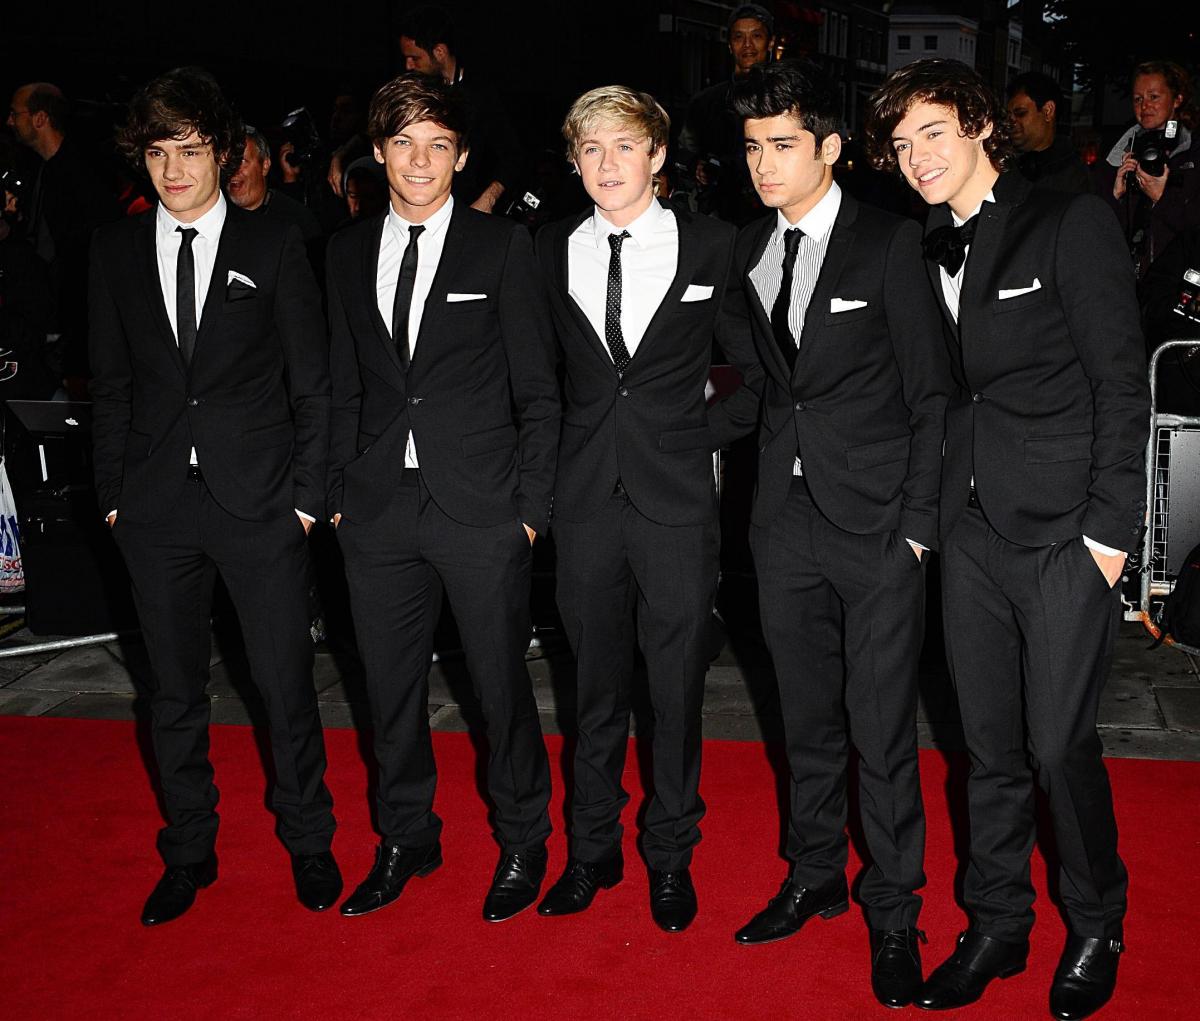 One Direction arriving for the 2011 GQ Men of the Year Awards